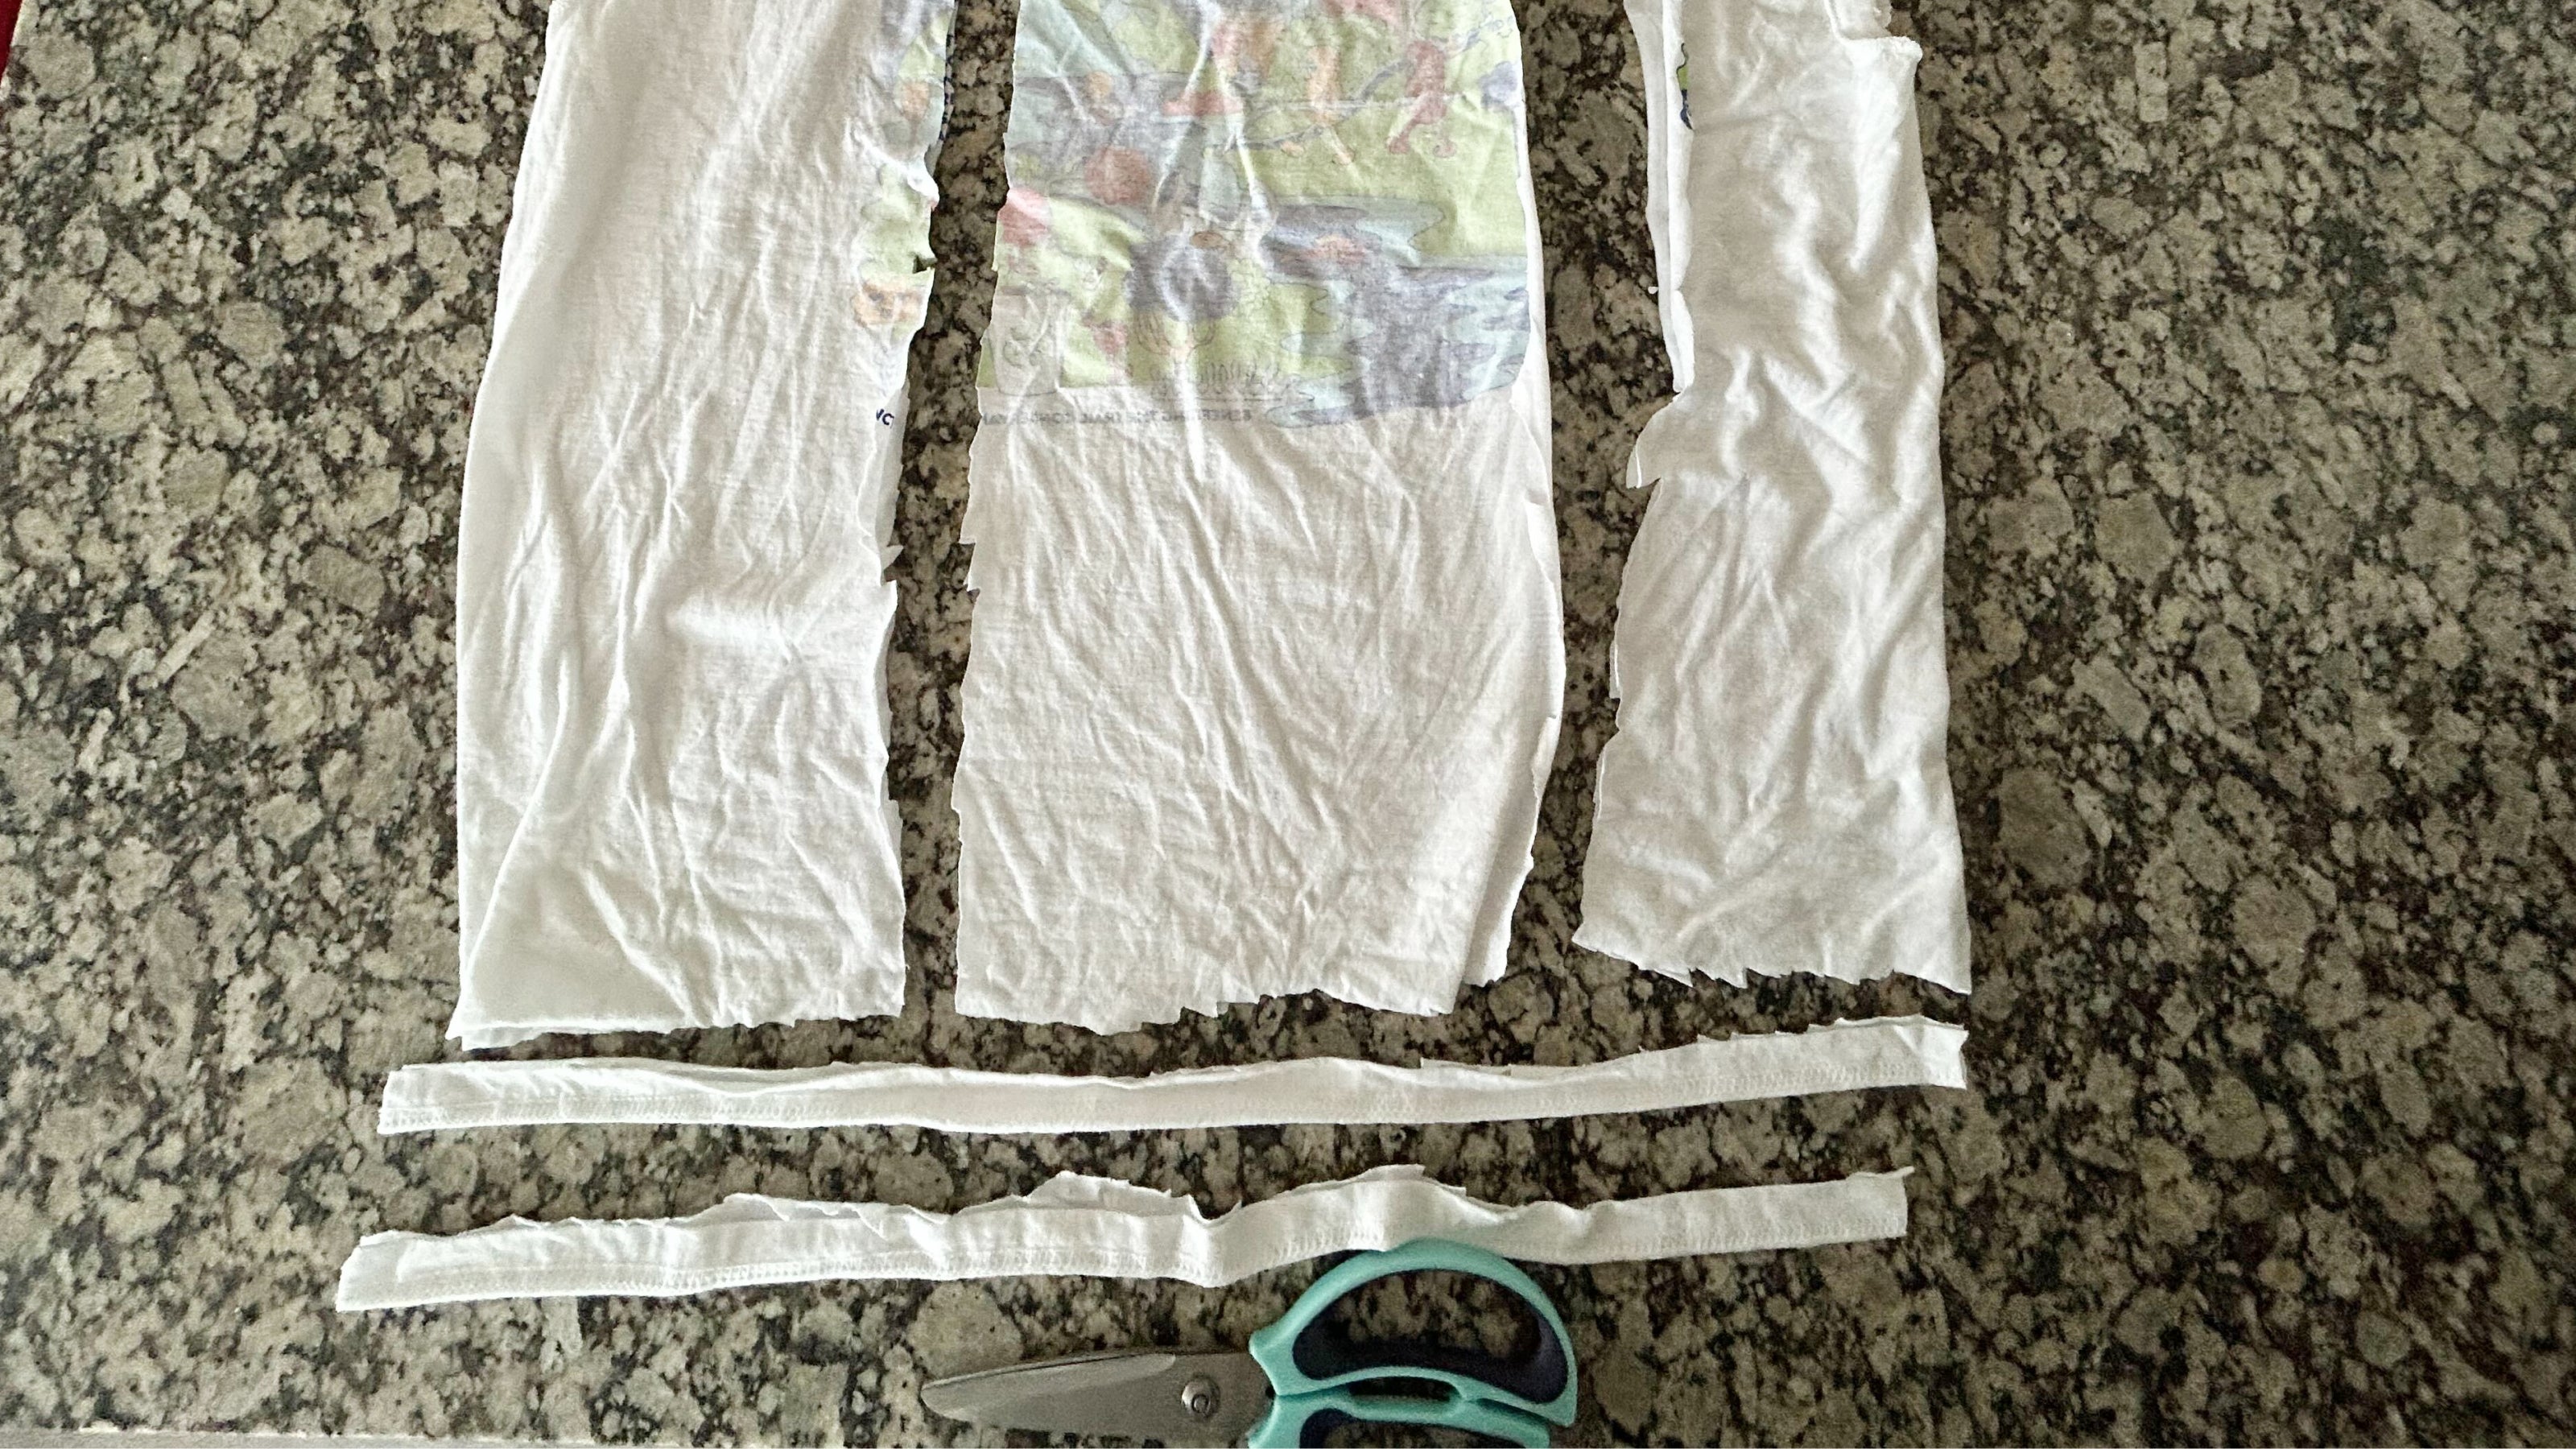 An old t shirt cut into pieces with scissors lying underneath